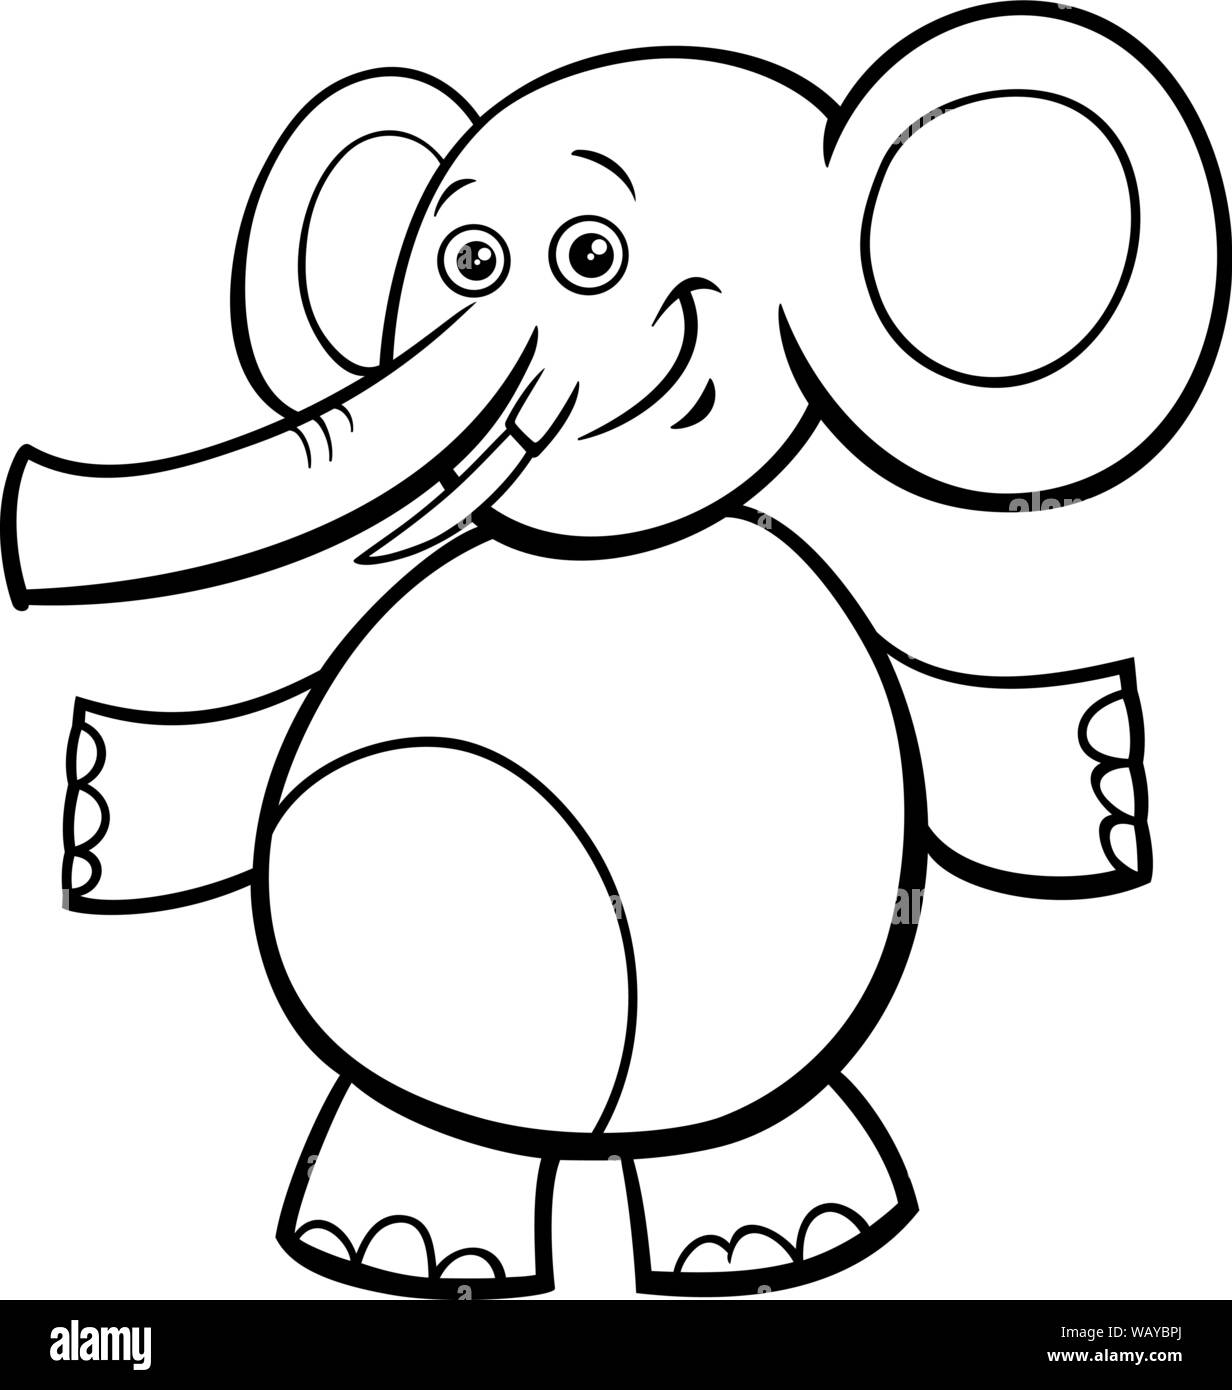 Black and White Cartoon Illustration of Funny Elephant Comic Animal Character Coloring Book Stock Vector